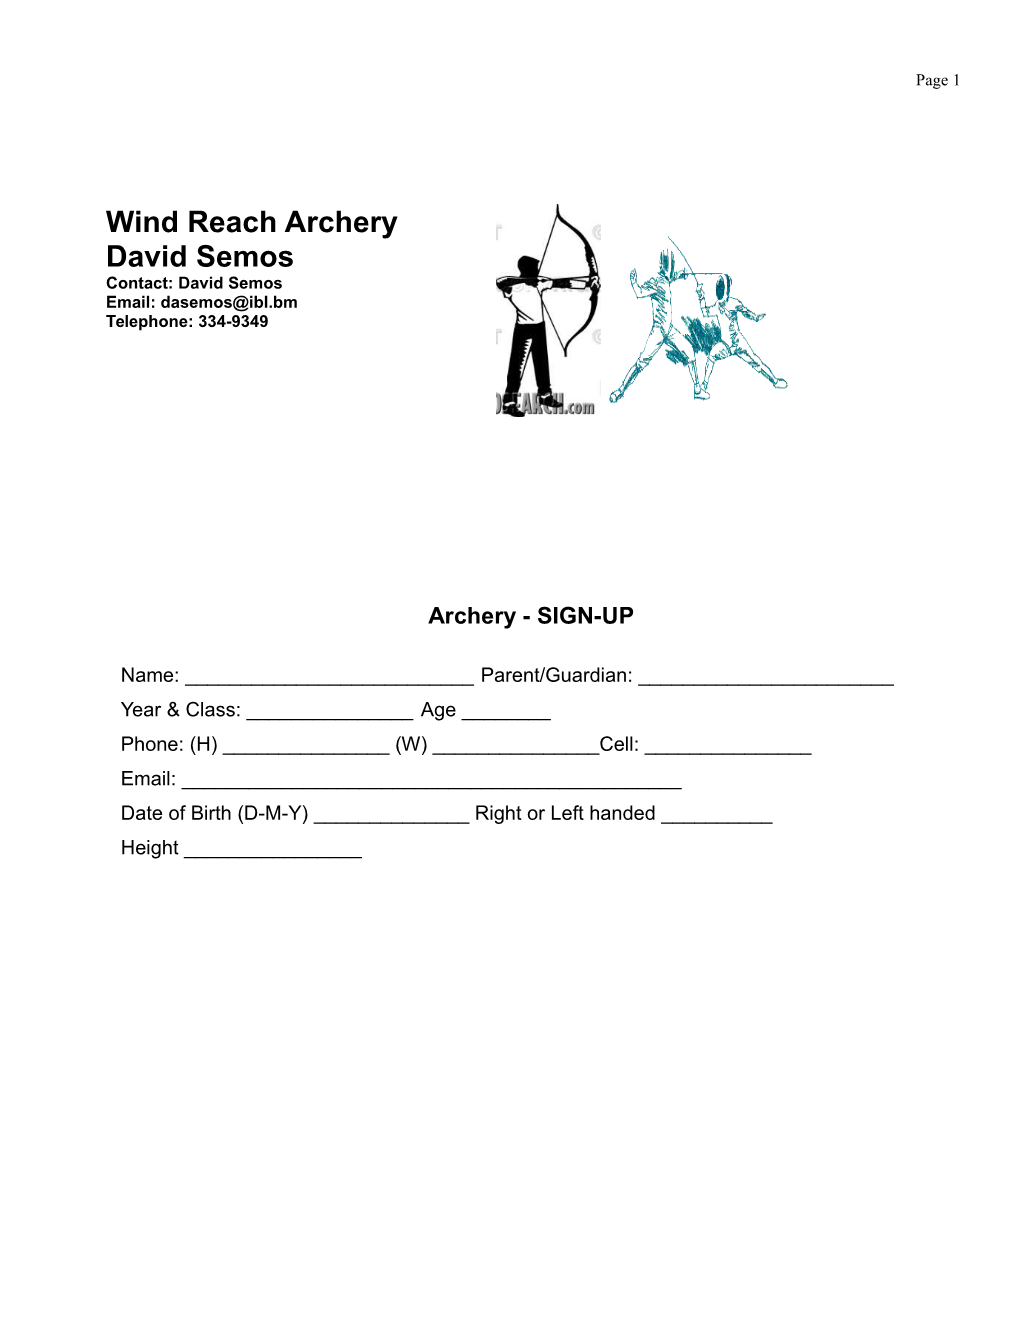 Archery and Fencing